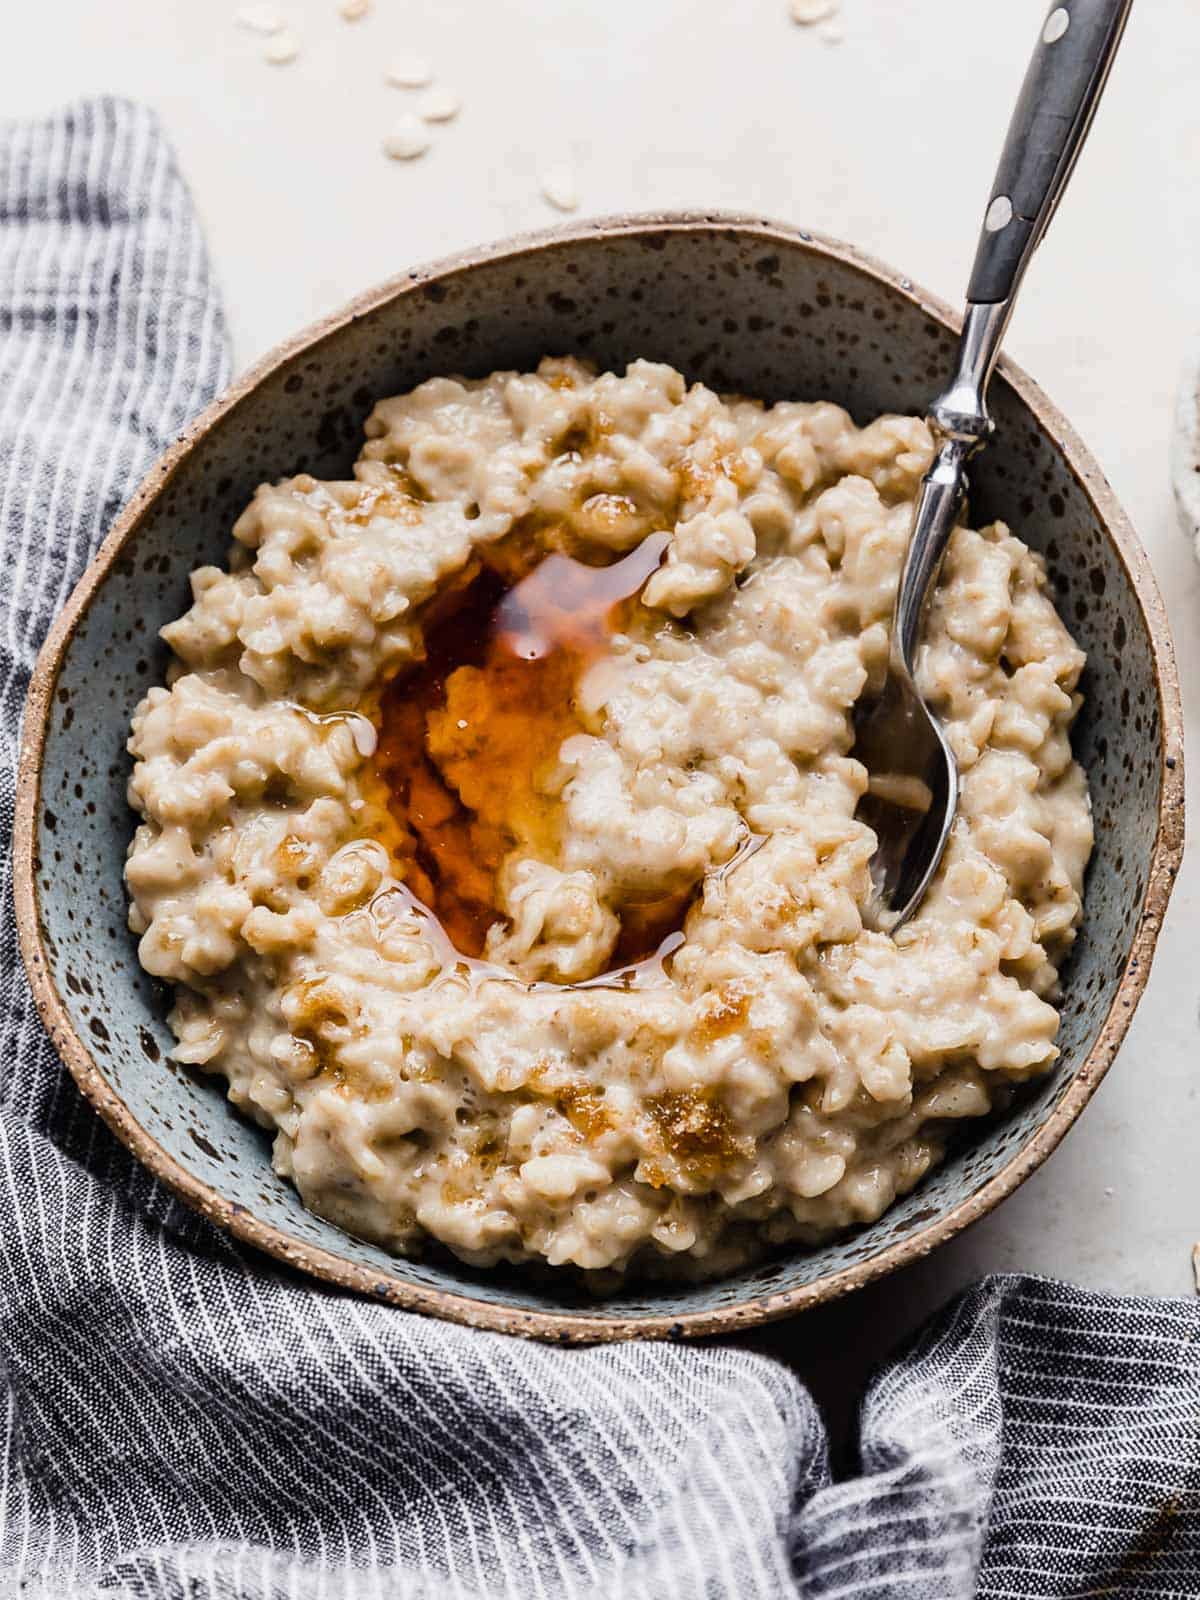 A bowl of oatmeal on a white background.